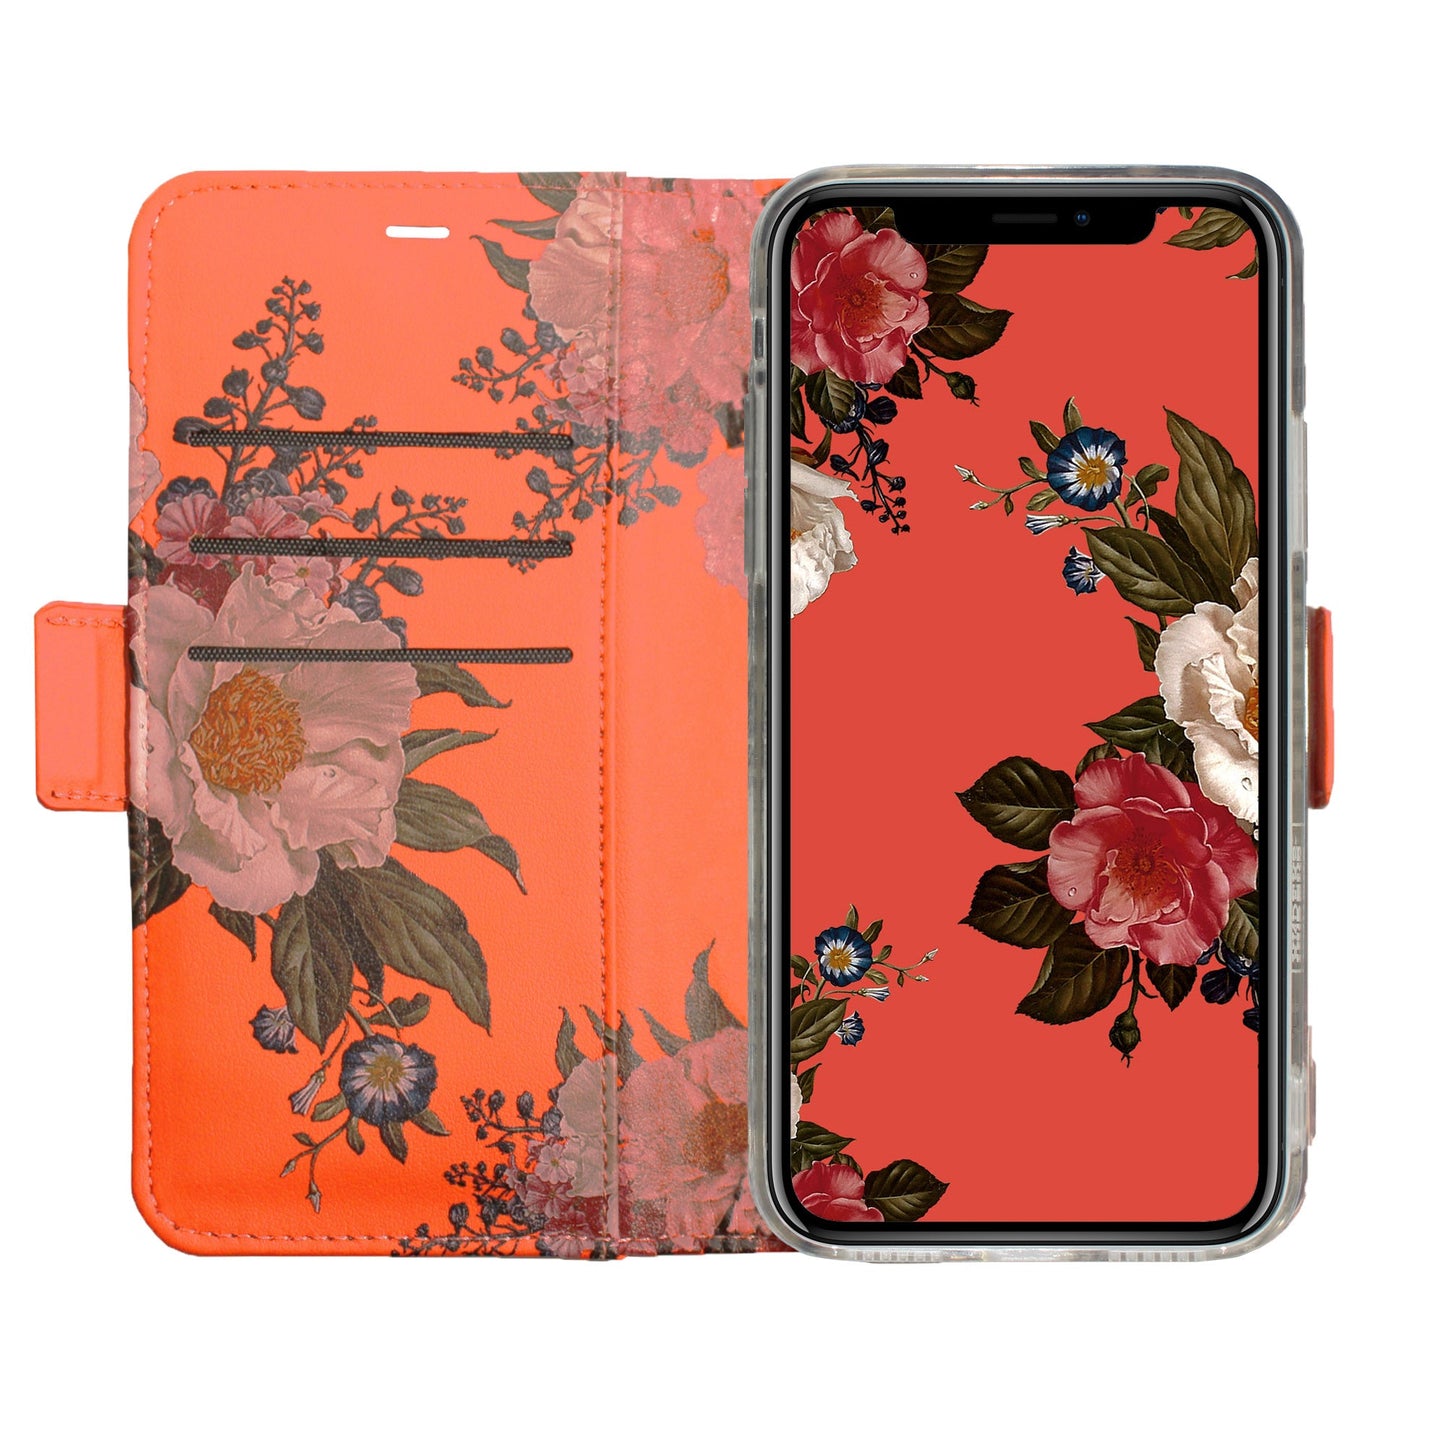 Flowers on Red Victor Case for iPhone X/XS